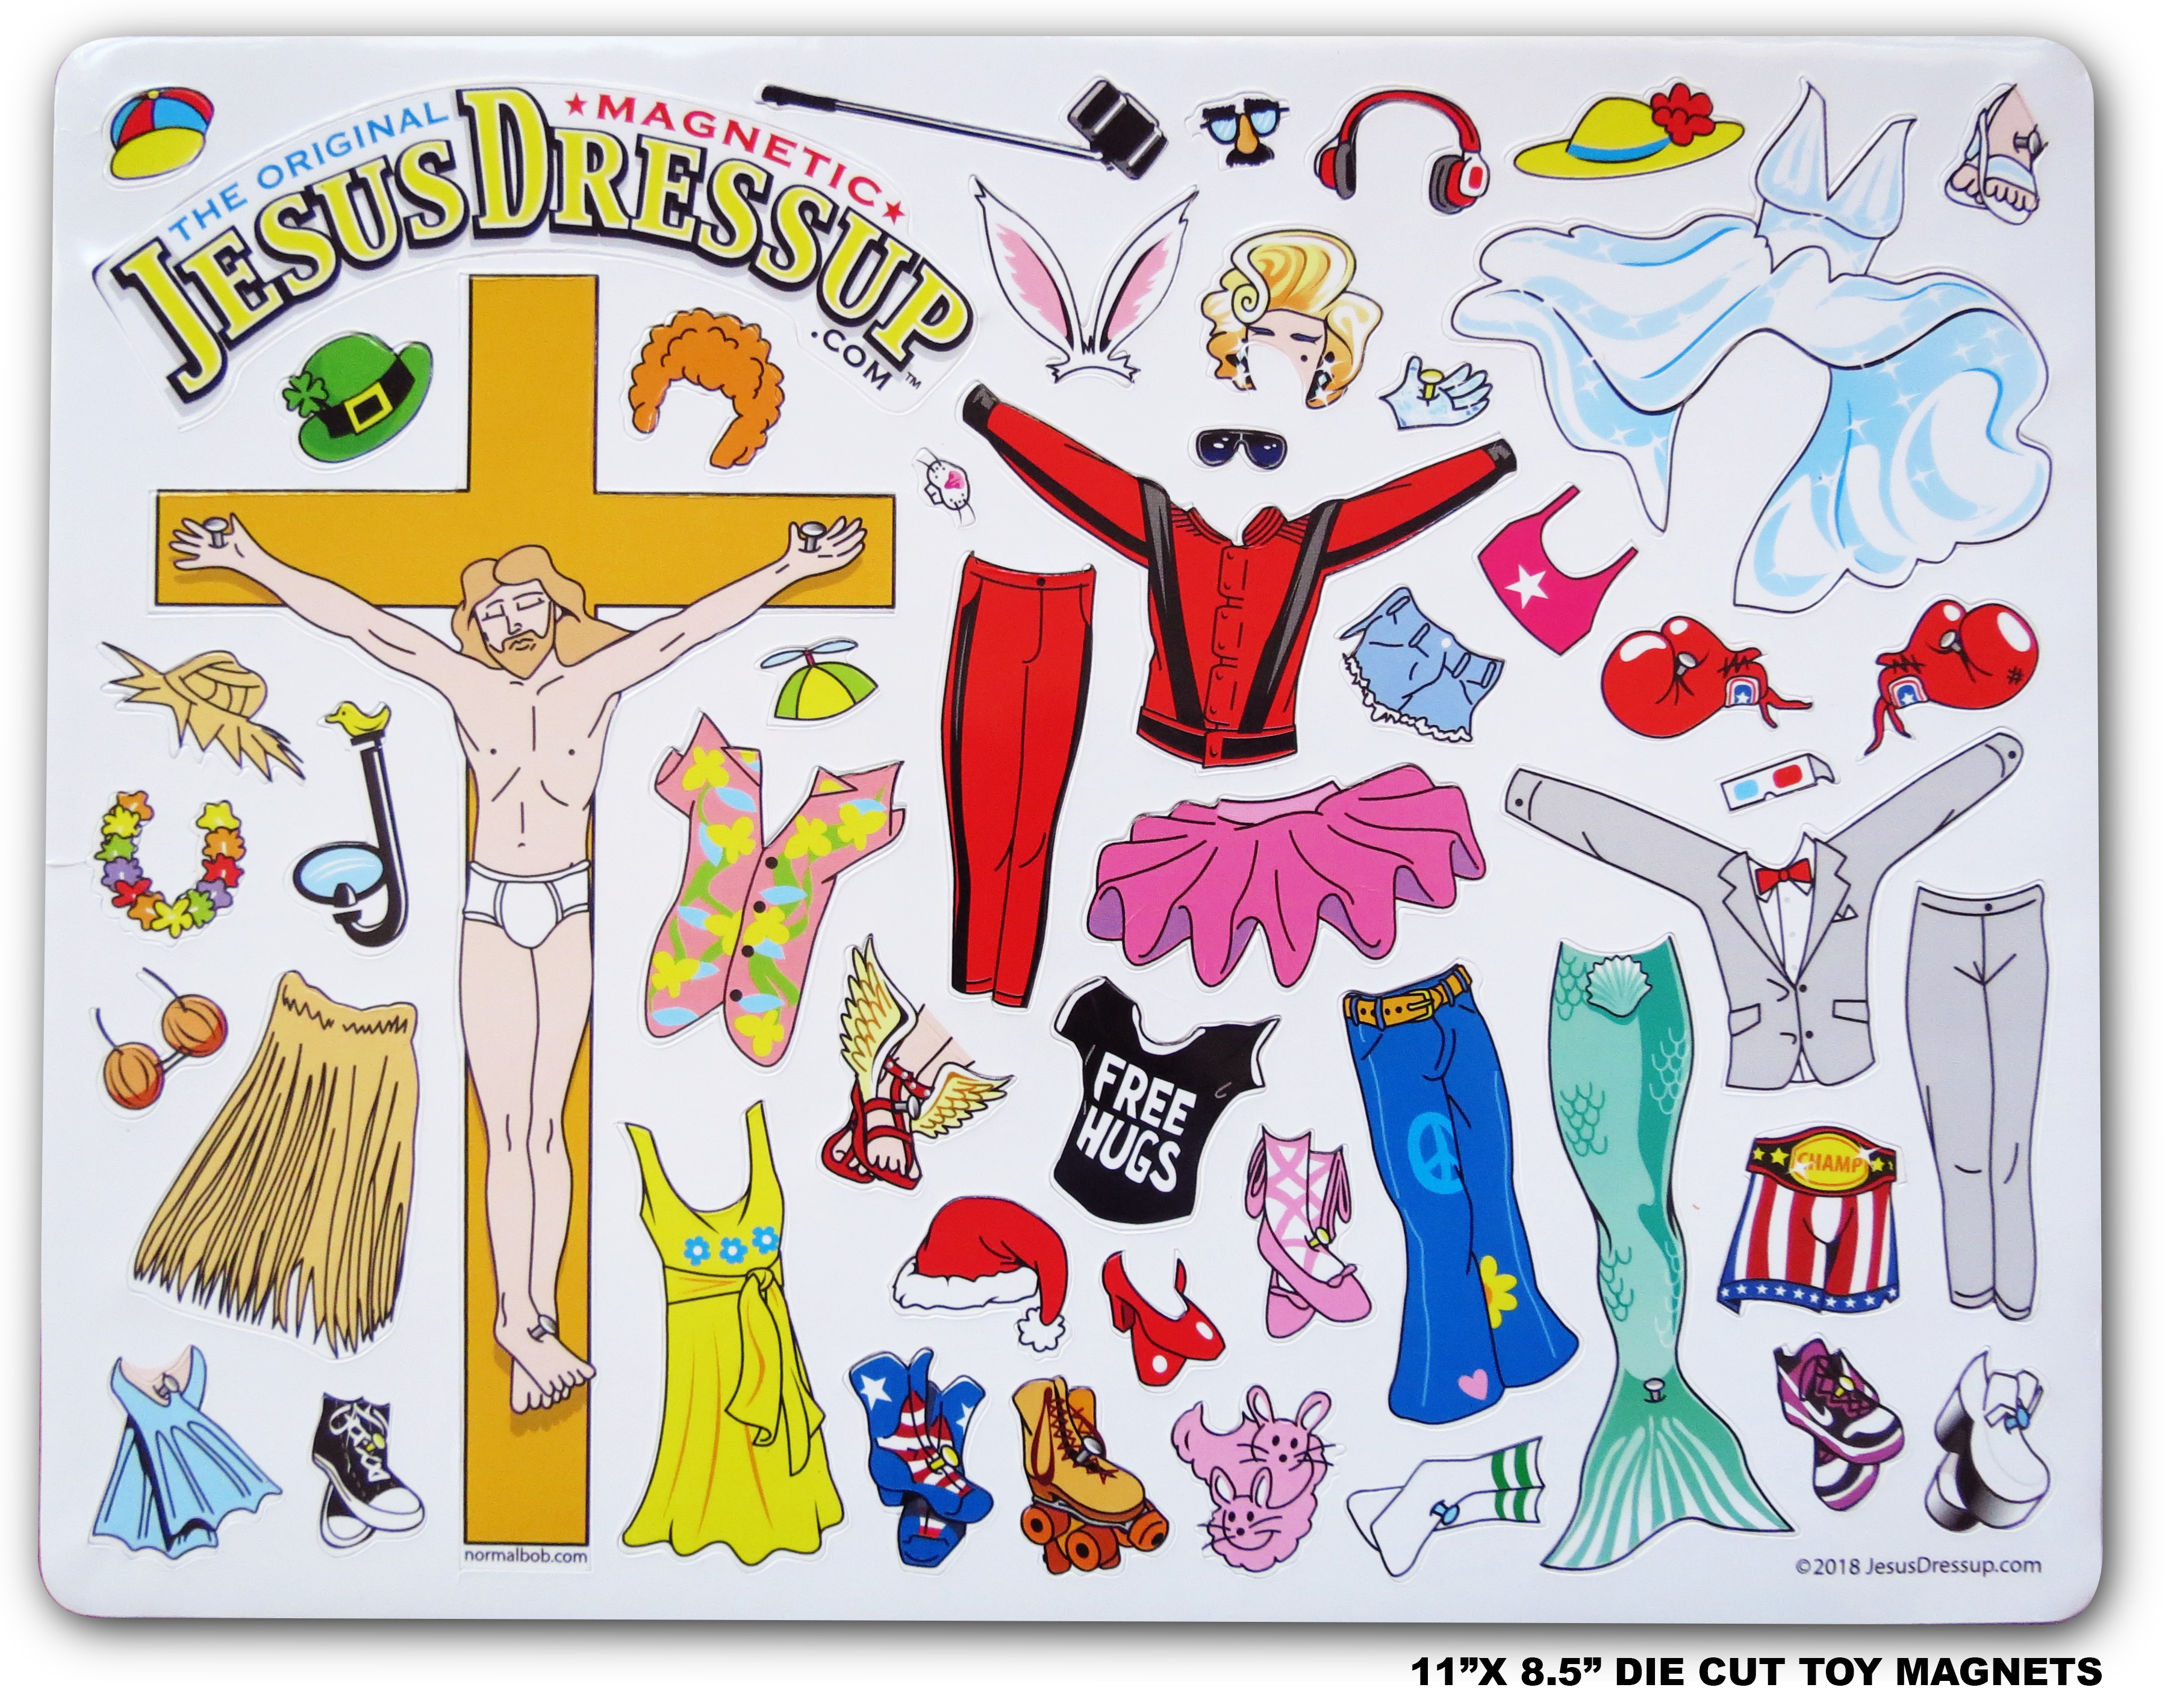 The Original Jesus Dressup fridge magnets ($15) include a hula skirt w/coconut bra, Marilyn Monroe dress, mermaid's tail, selfie stick and a wide variety of hats, shoes, pants and everything inbetween 